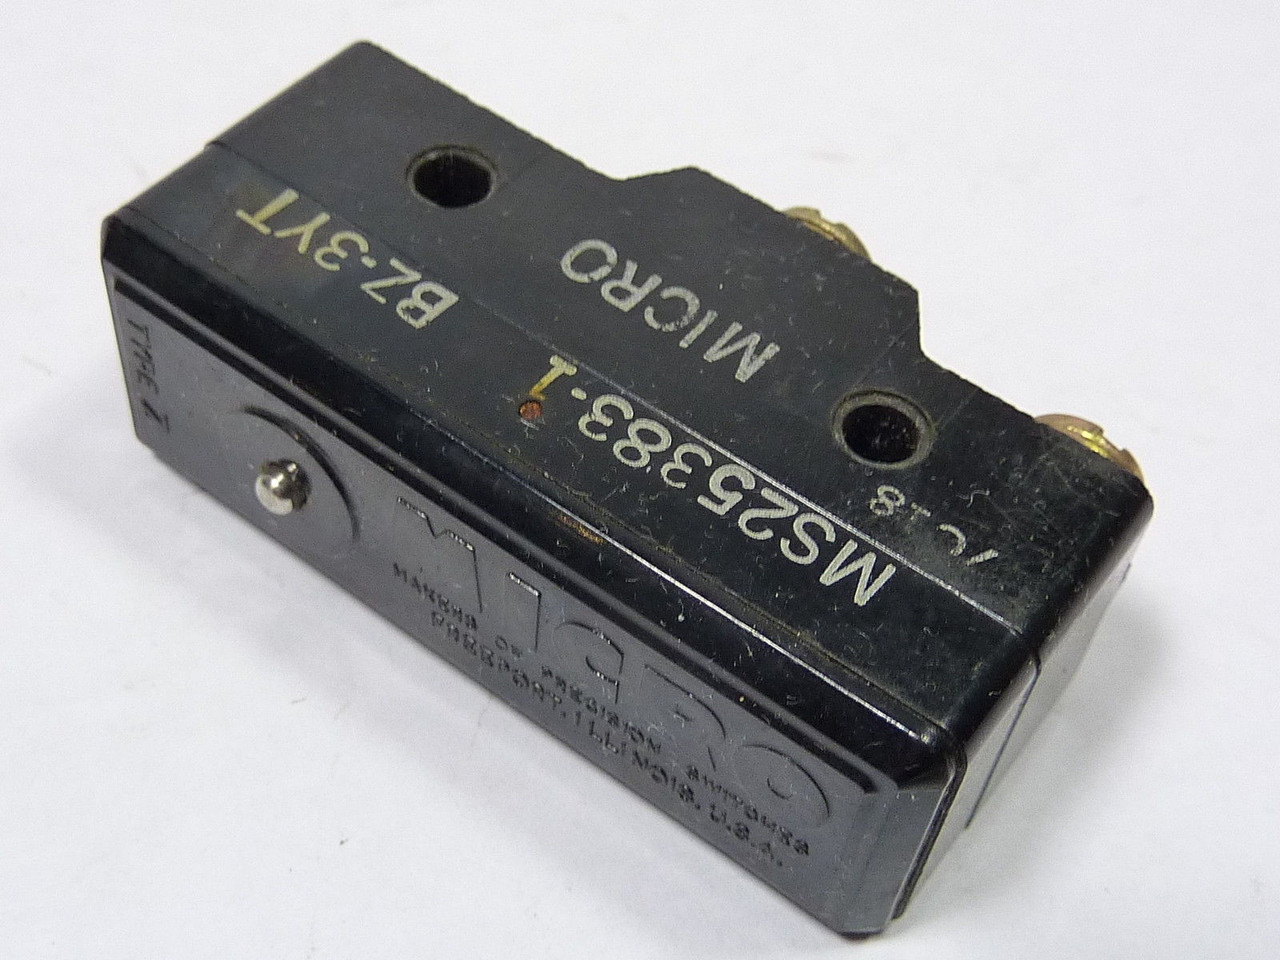 Microswitch BZ-3YT Snap Action Basic Limit Switch USED